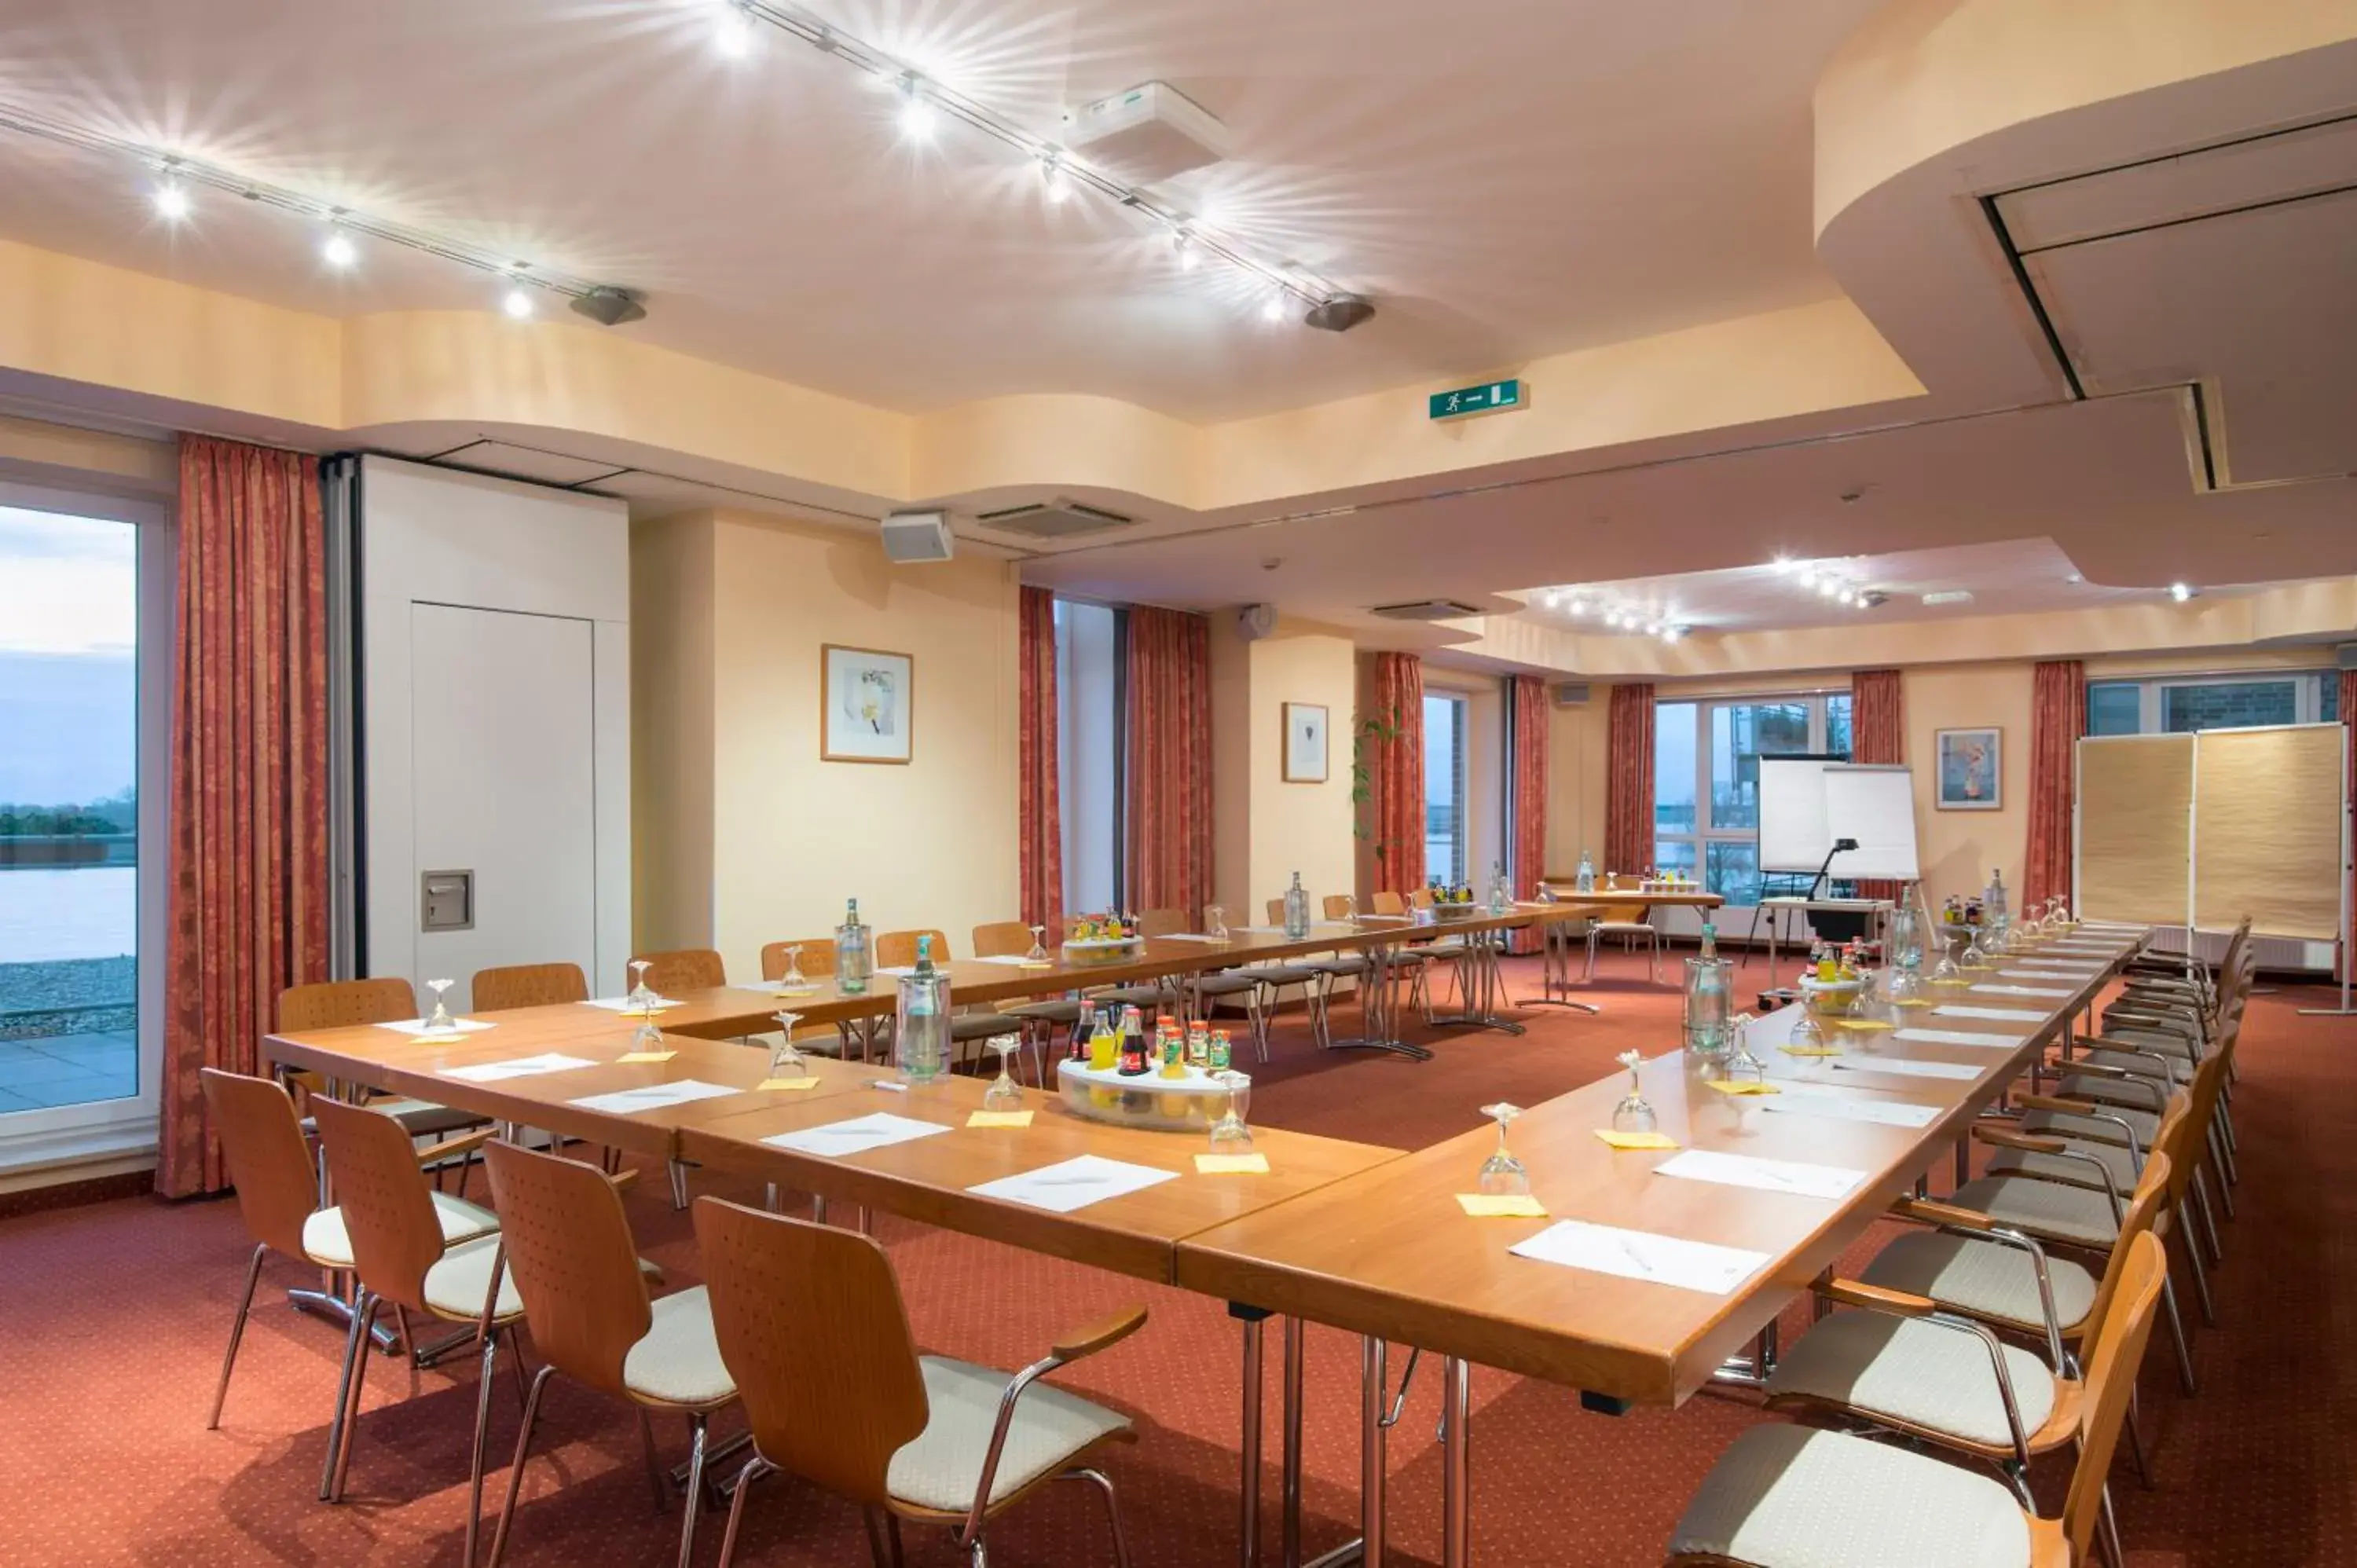 Meeting/conference room in Hotel Rheinpark Rees